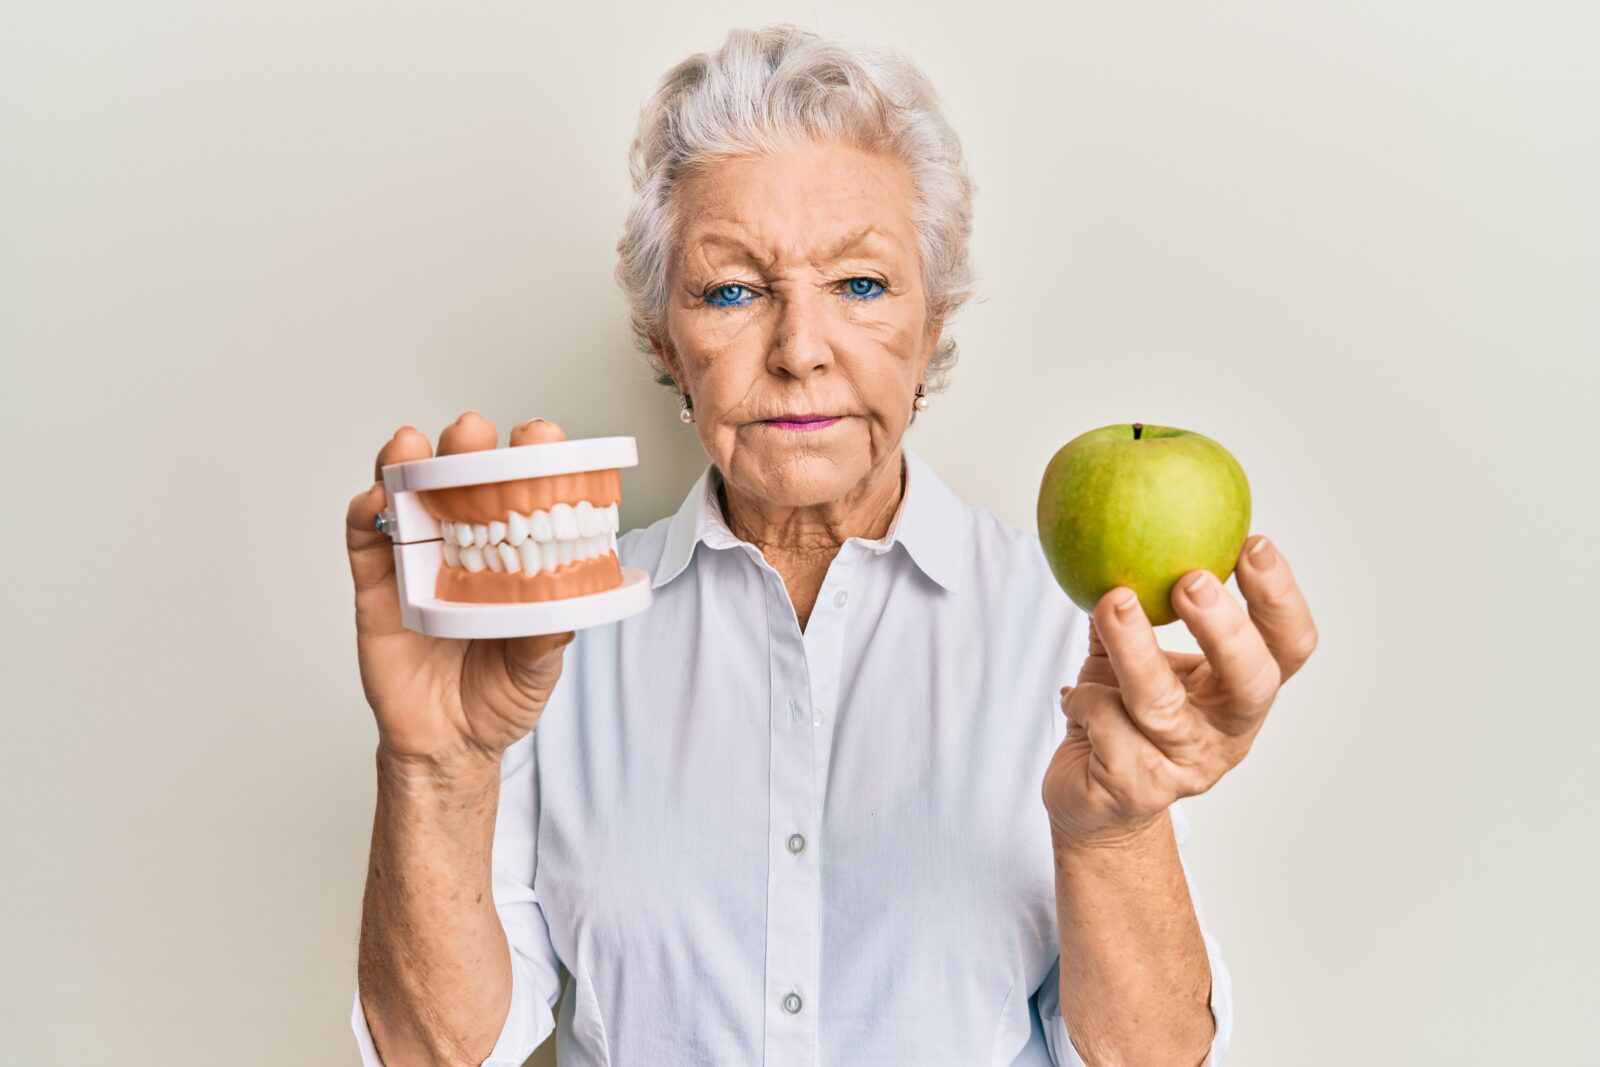 older woman holding dentures in one hand and an apple in the other with an unhappy expression on her face